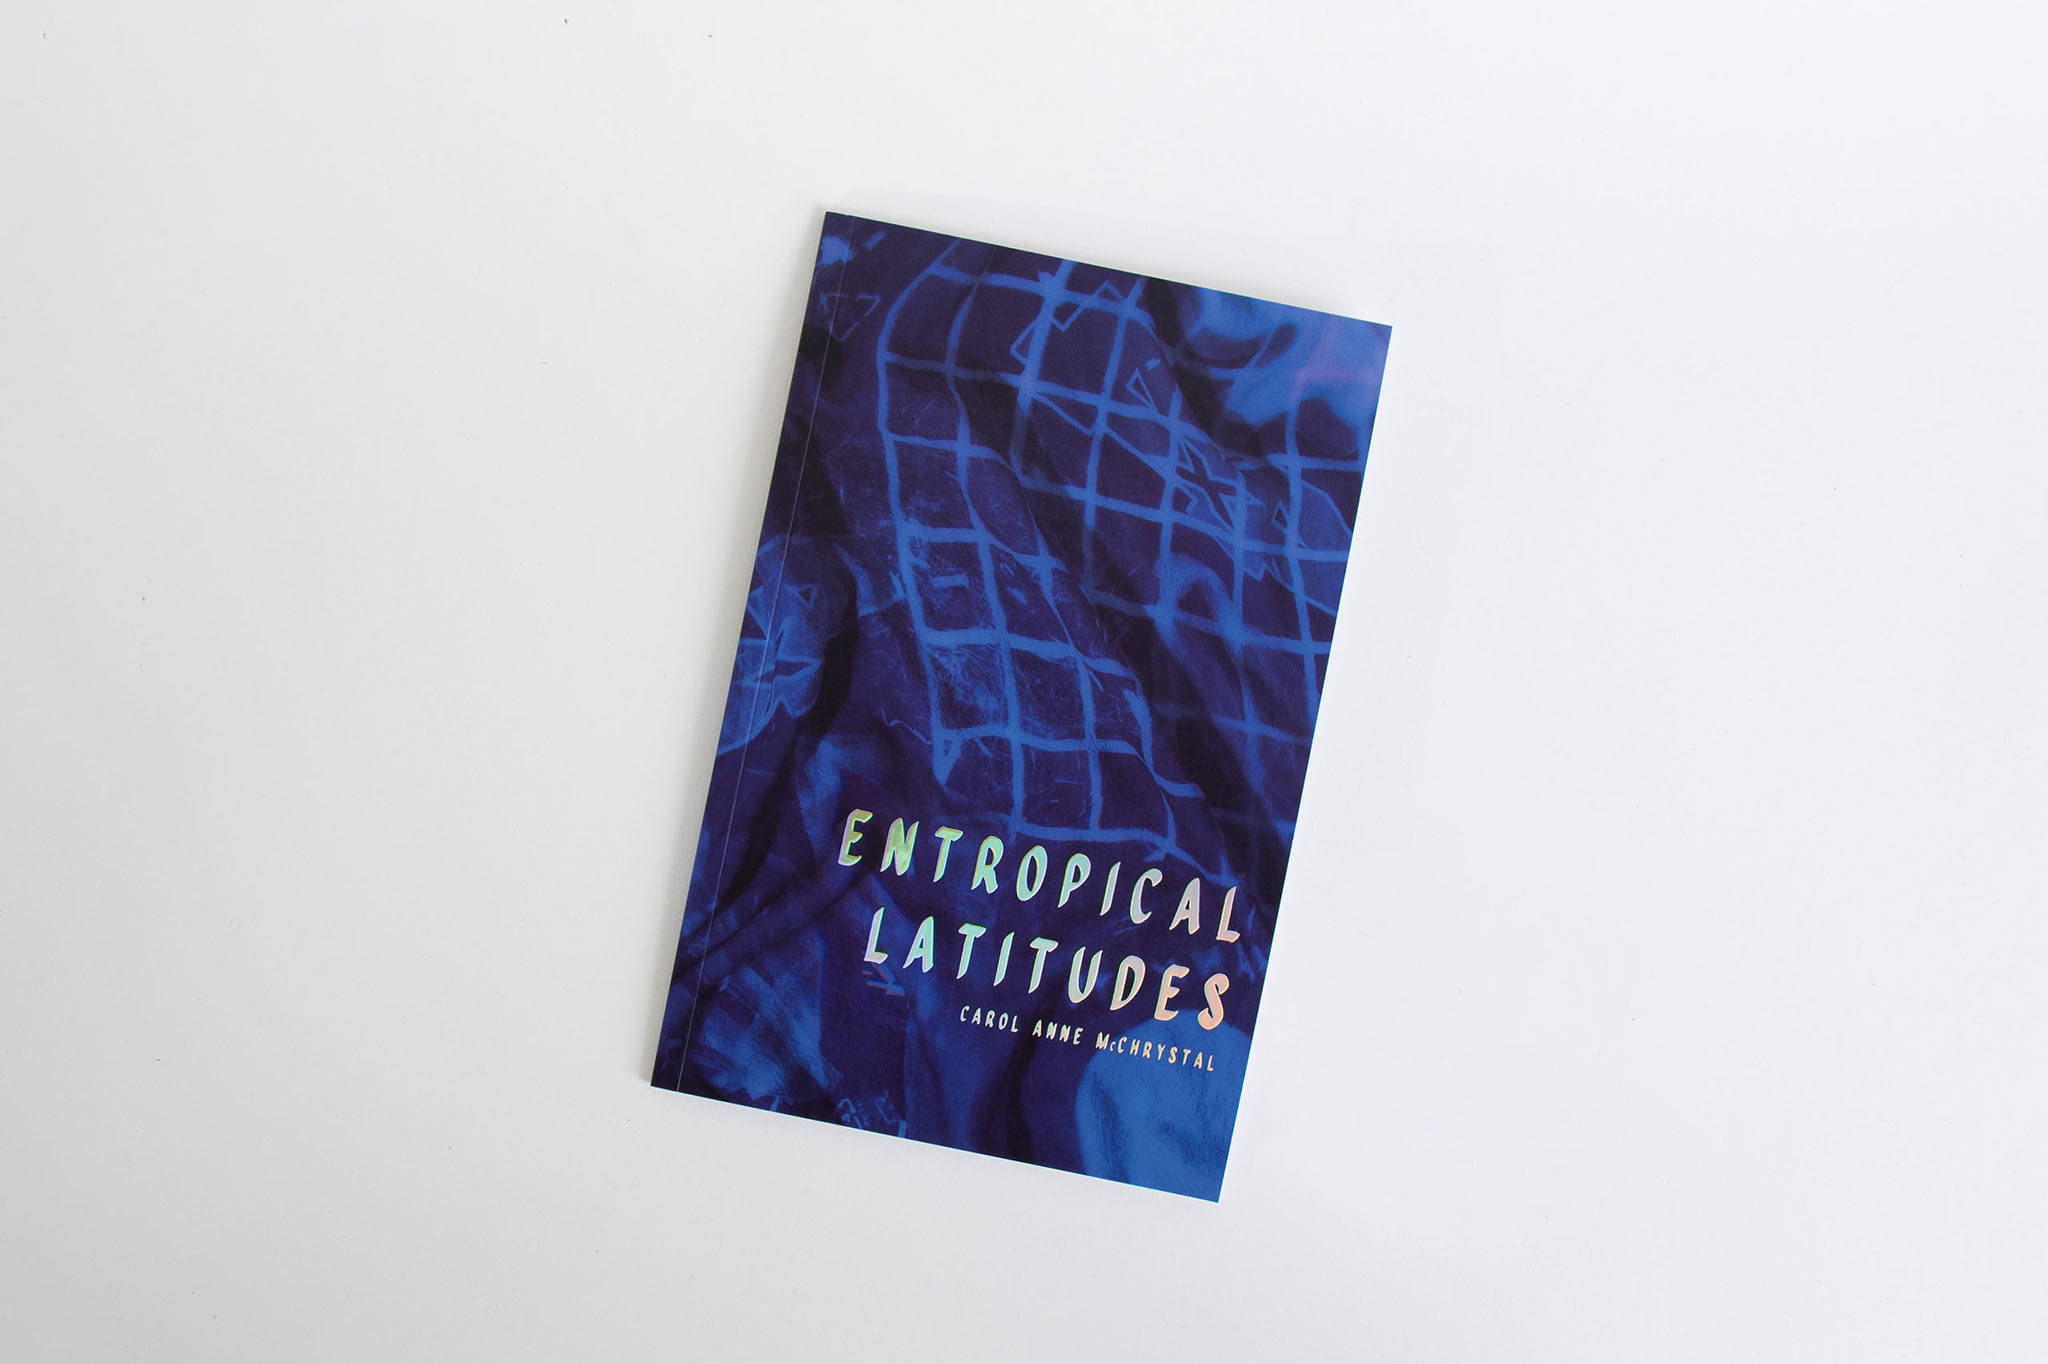 Entropical Latitudes Book of Poems & Photography 2019  Six crystalline, embodied incantations in anticipation of a world without us. Equal parts catastrophic abstraction, shimmering extractivism and exquisite syntropy. A trail guide to indescribable beauty amid the twilight world of capital.  12 full color 8.5